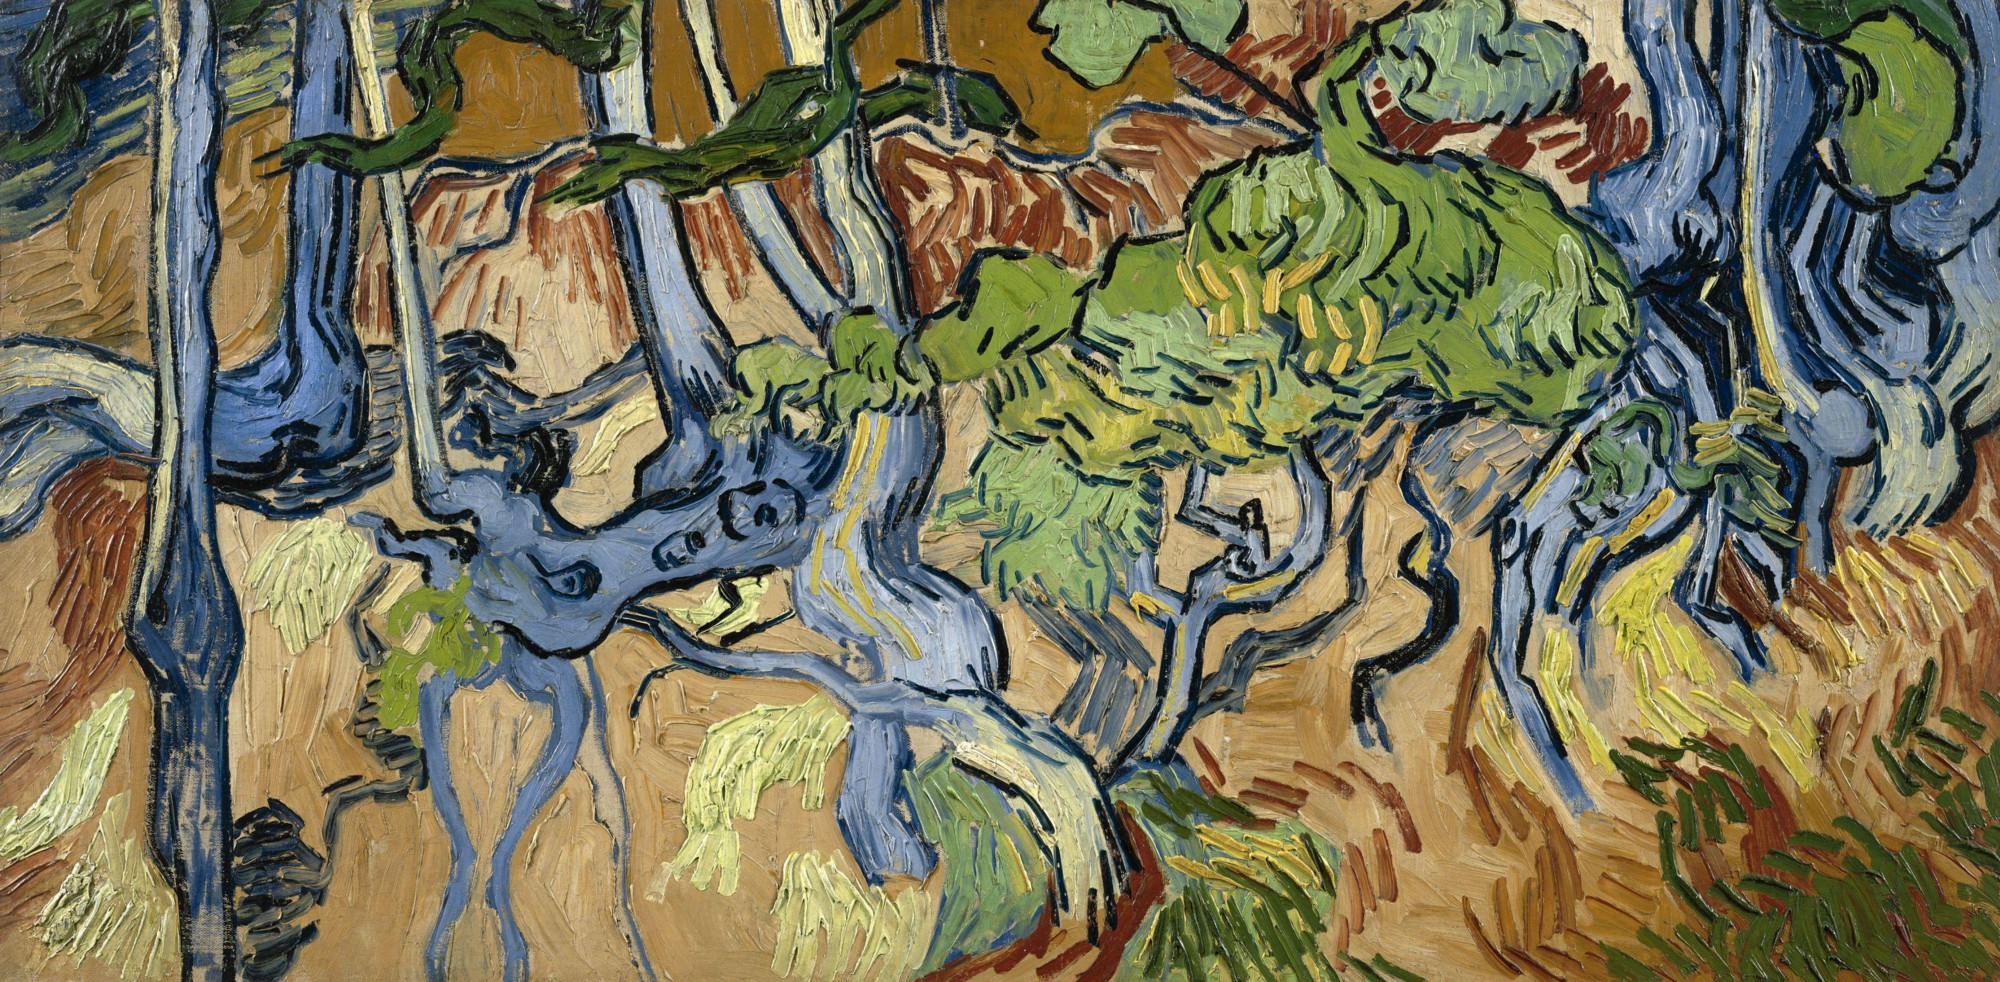 Vincent van Gogh, “Tree Roots and Trunks”, 1890 CE, Wikipedia, public domain.[2]